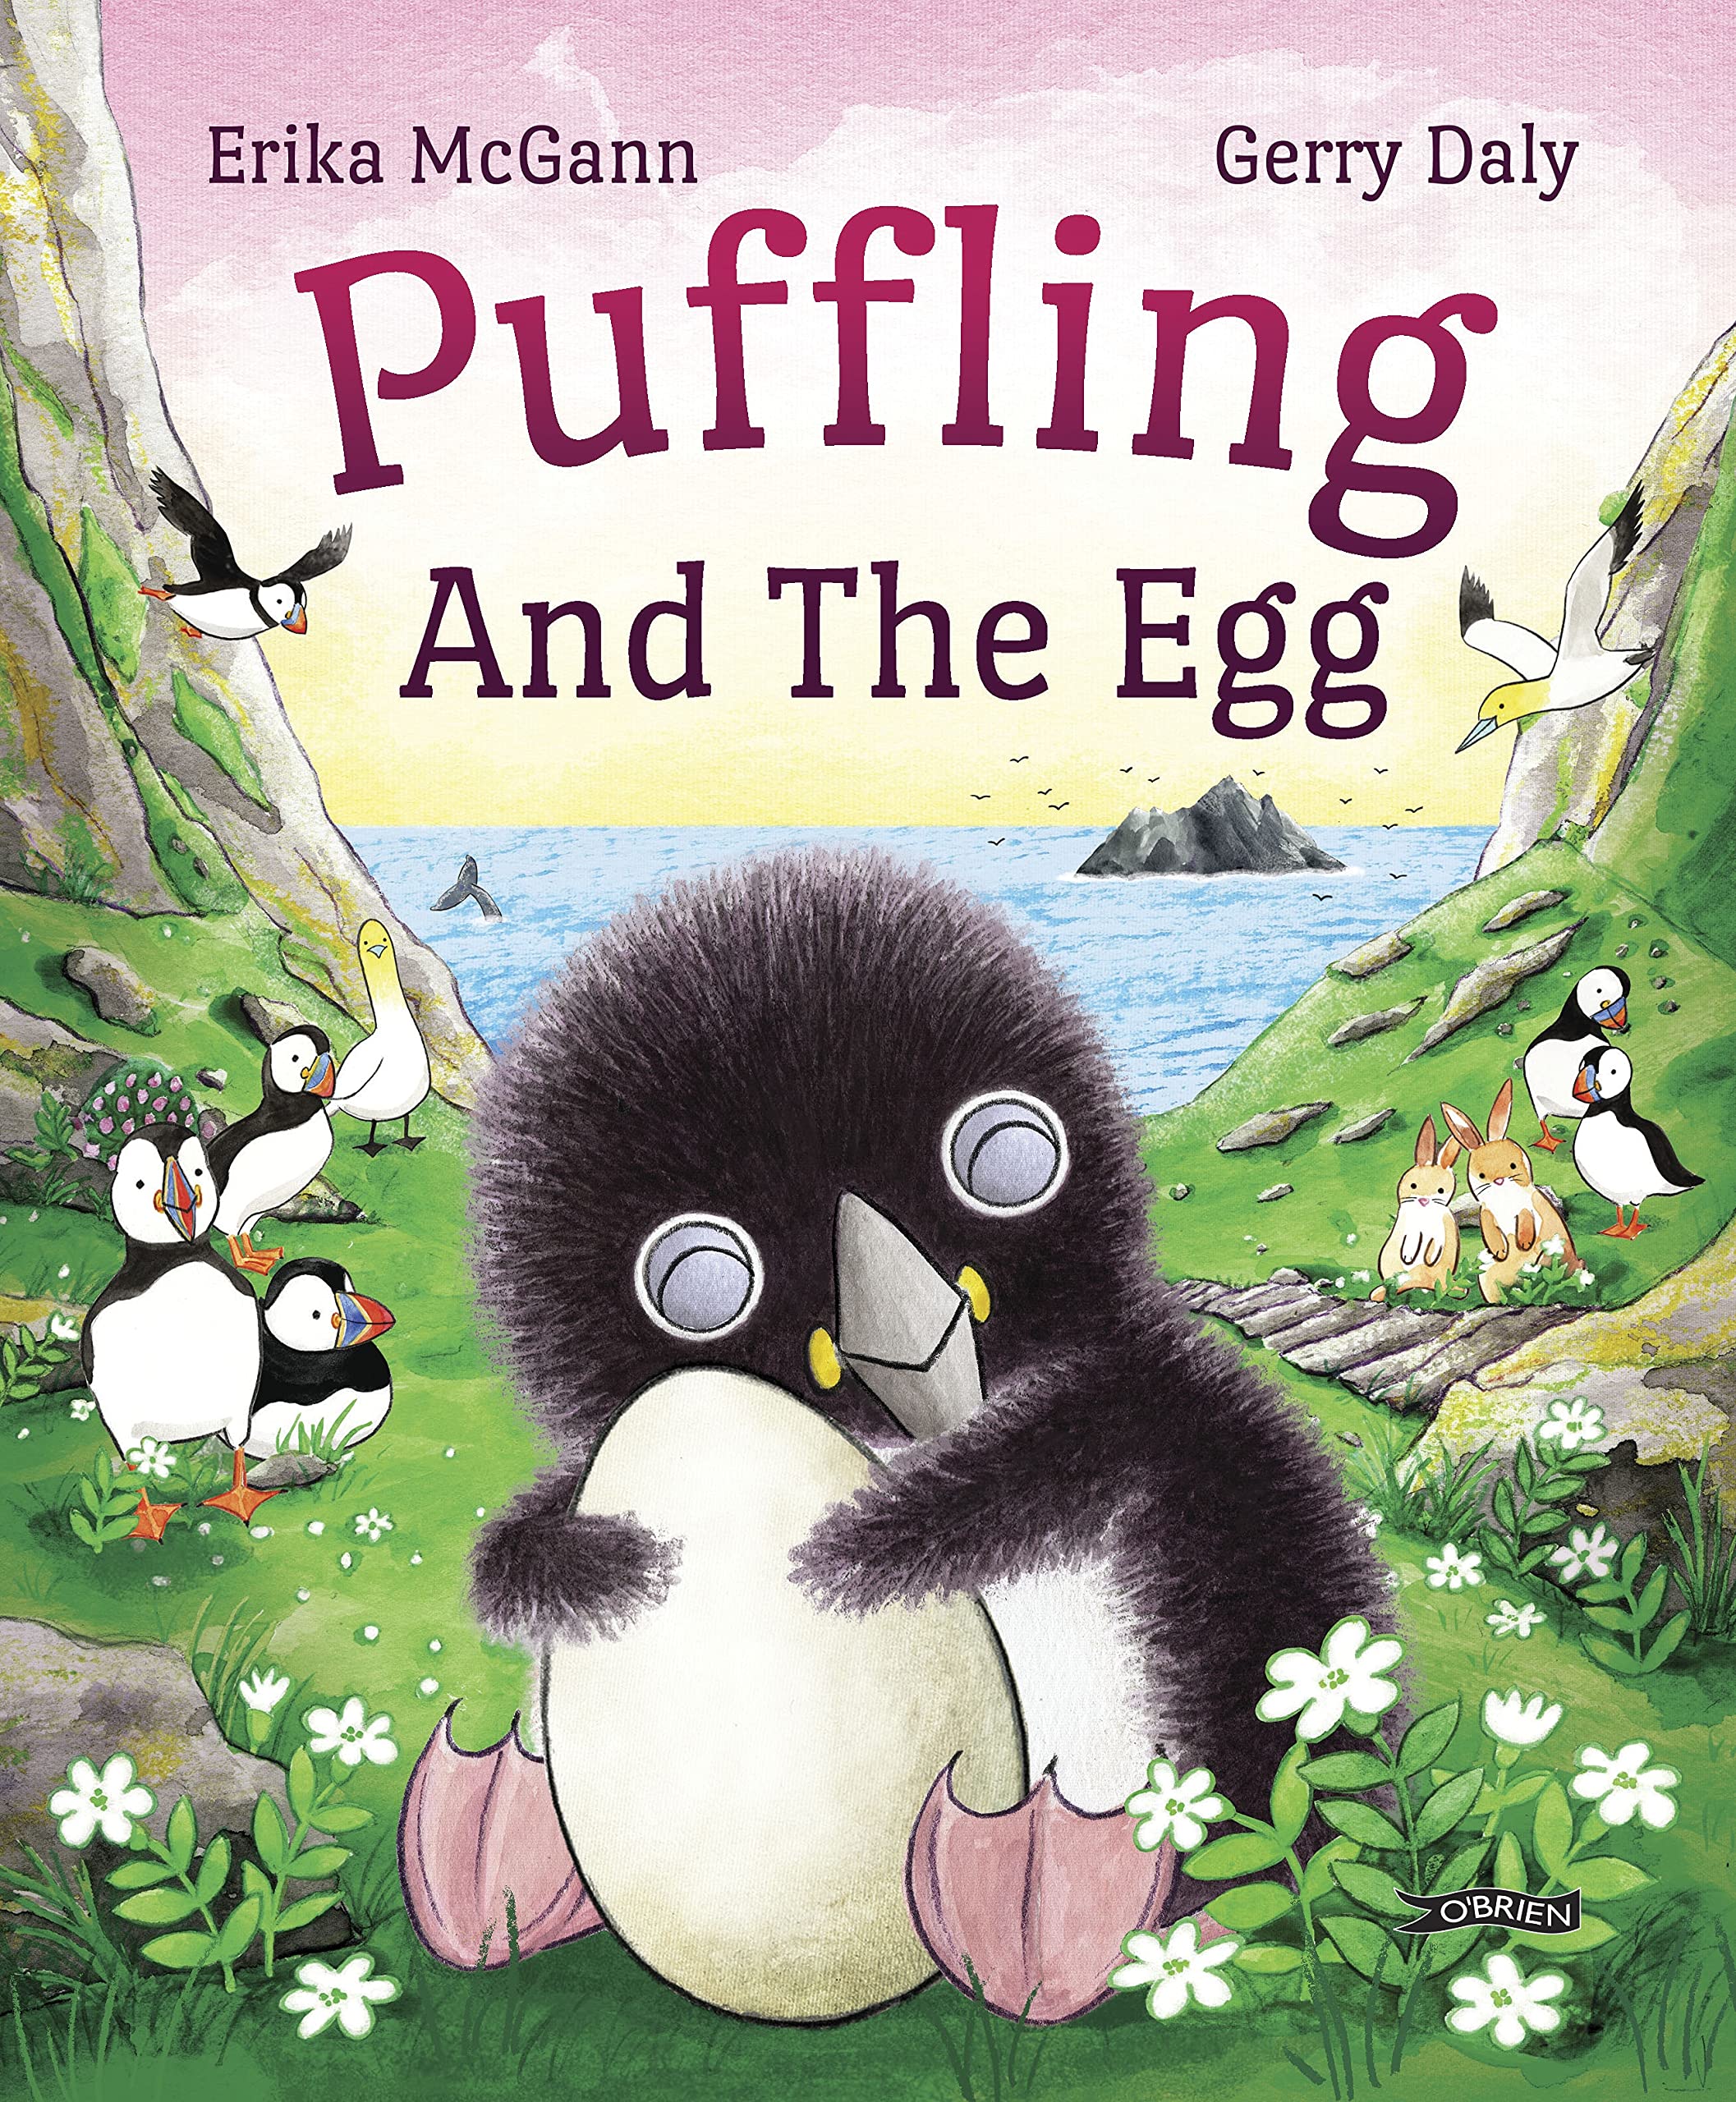 Puffling and the Egg